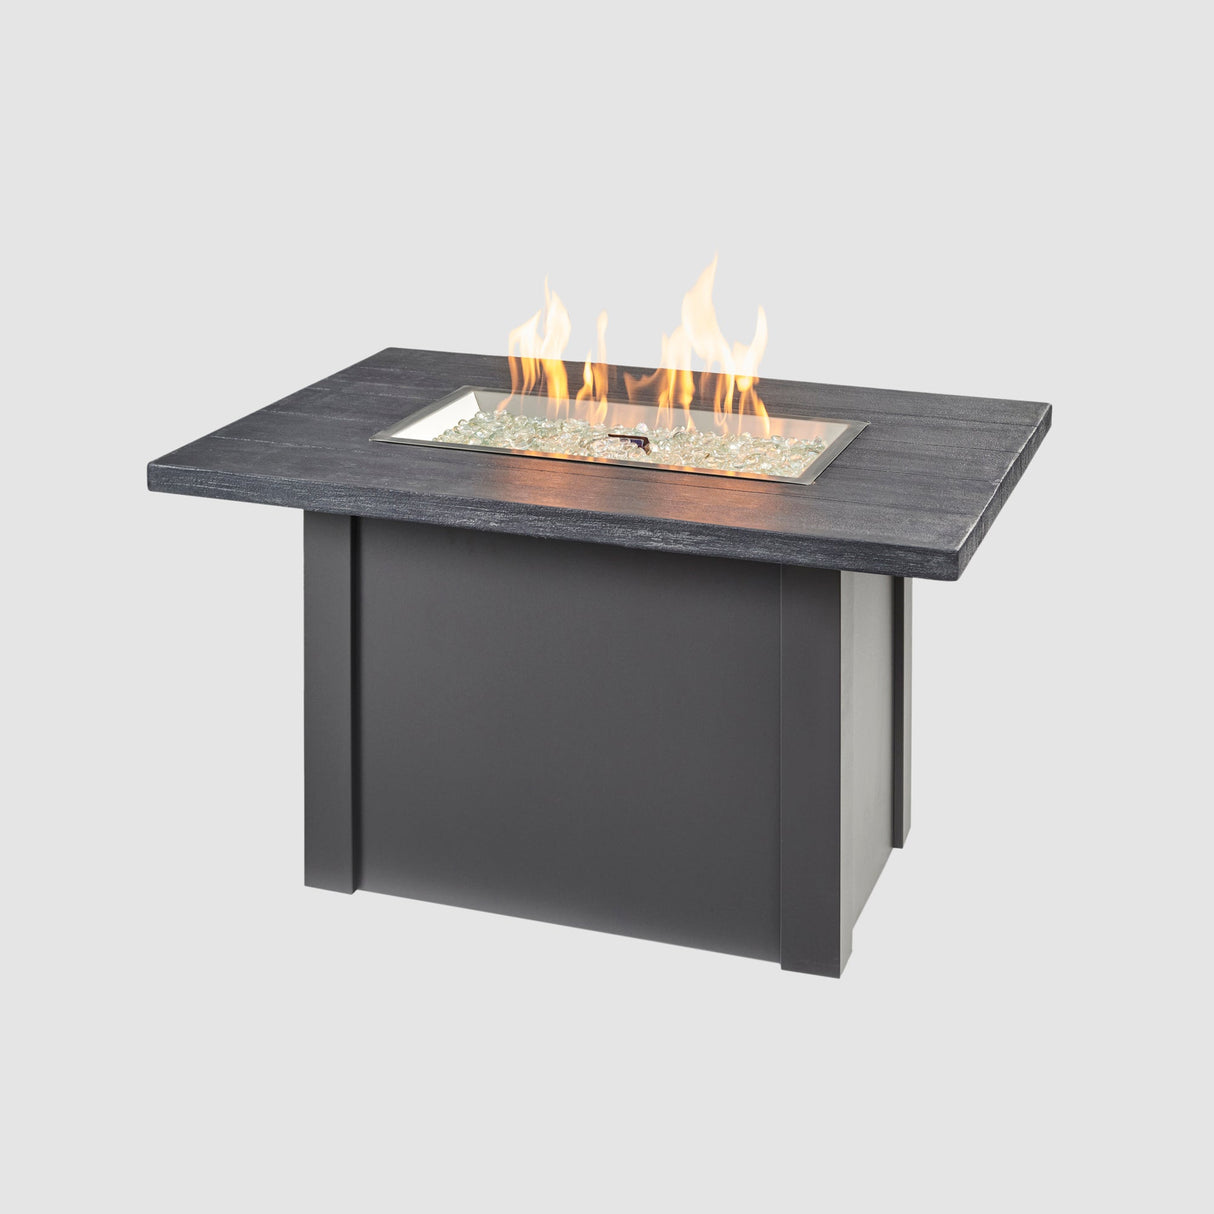 A large flame coming off the burner of a Havenwood Rectangular Gas Fire Pit Table with a Carbon Grey top and Graphite Grey base